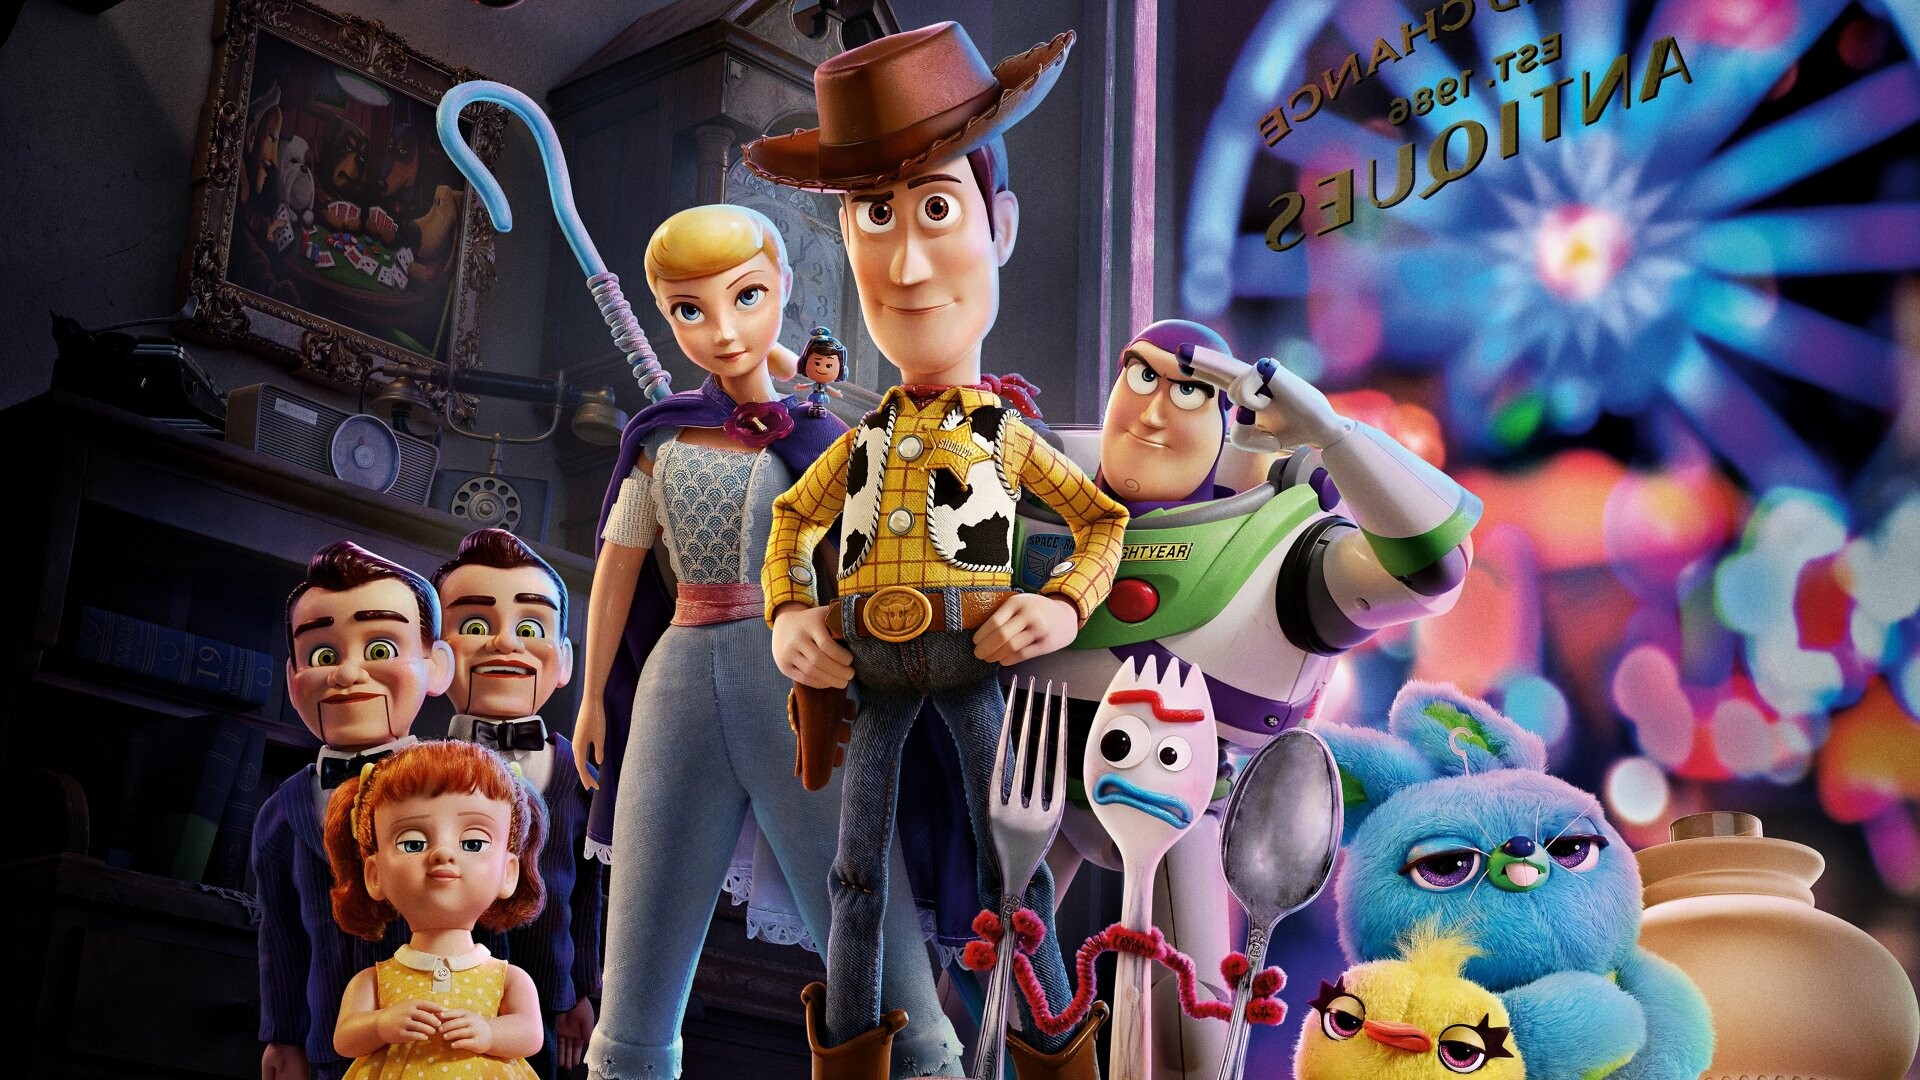 Toy Story: Won The Academy Award for Best Animated Feature at the 92nd Academy Awards. 1920x1080 Full HD Background.